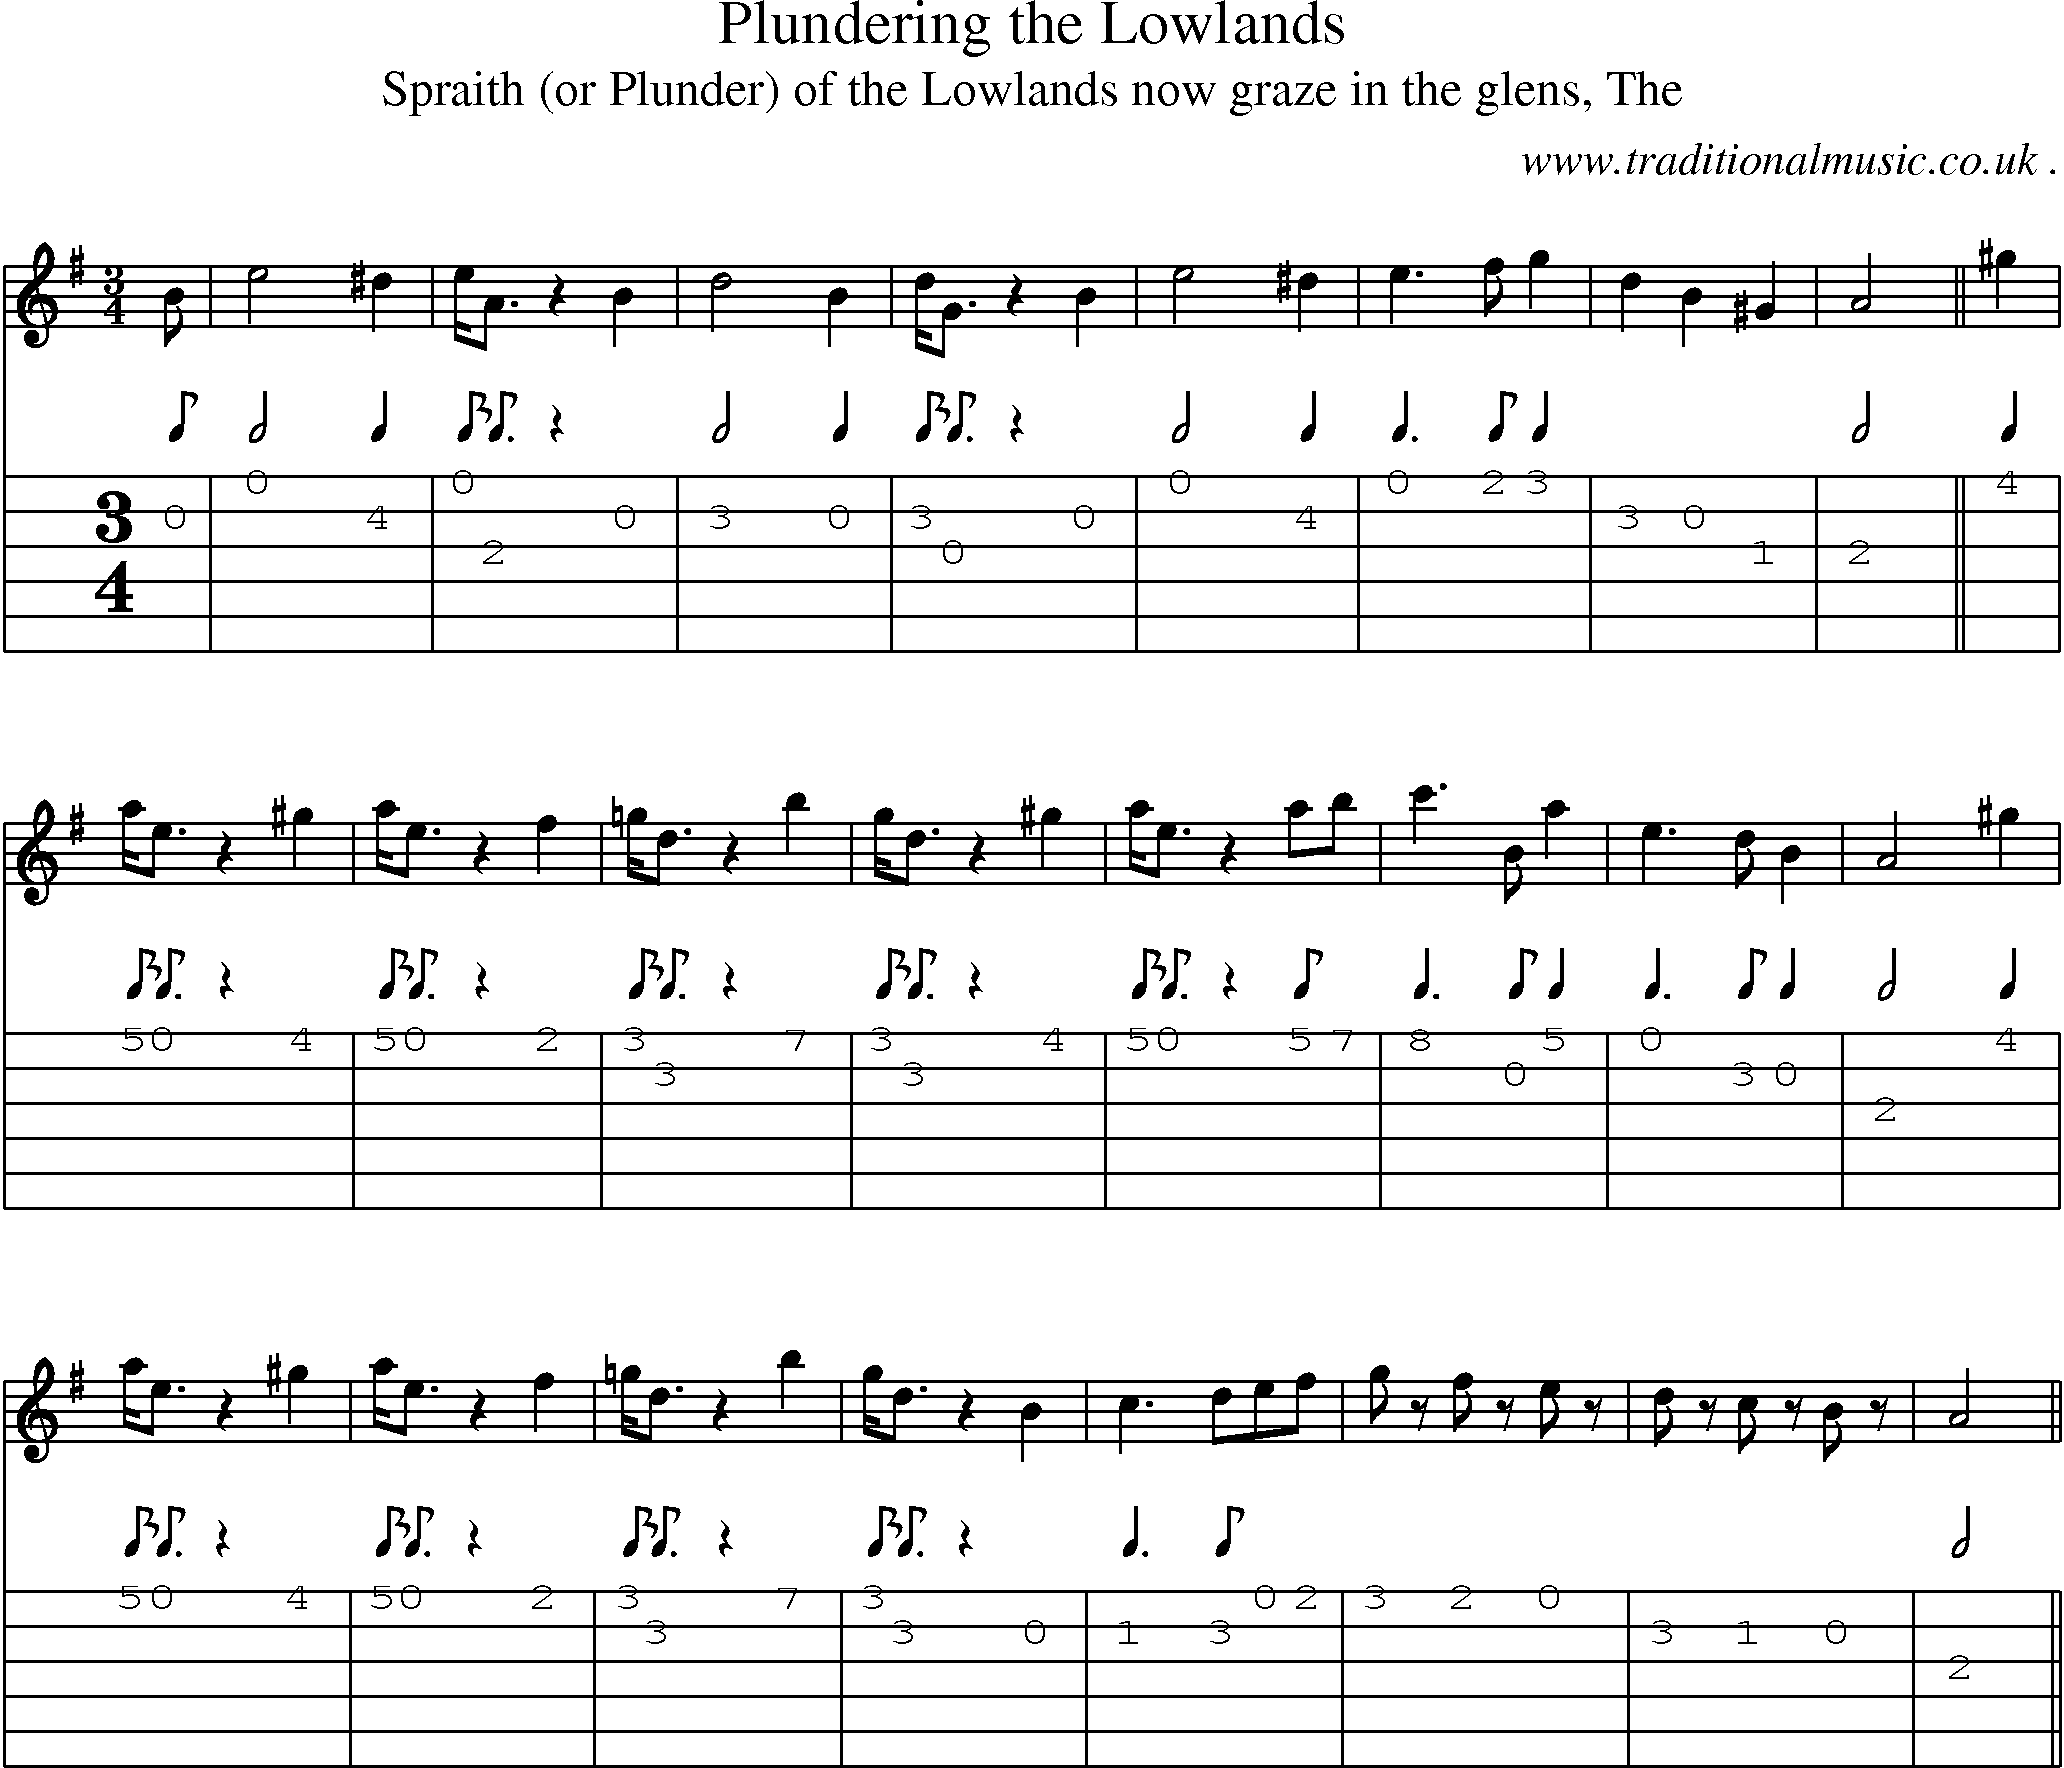 Sheet-music  score, Chords and Guitar Tabs for Plundering The Lowlands